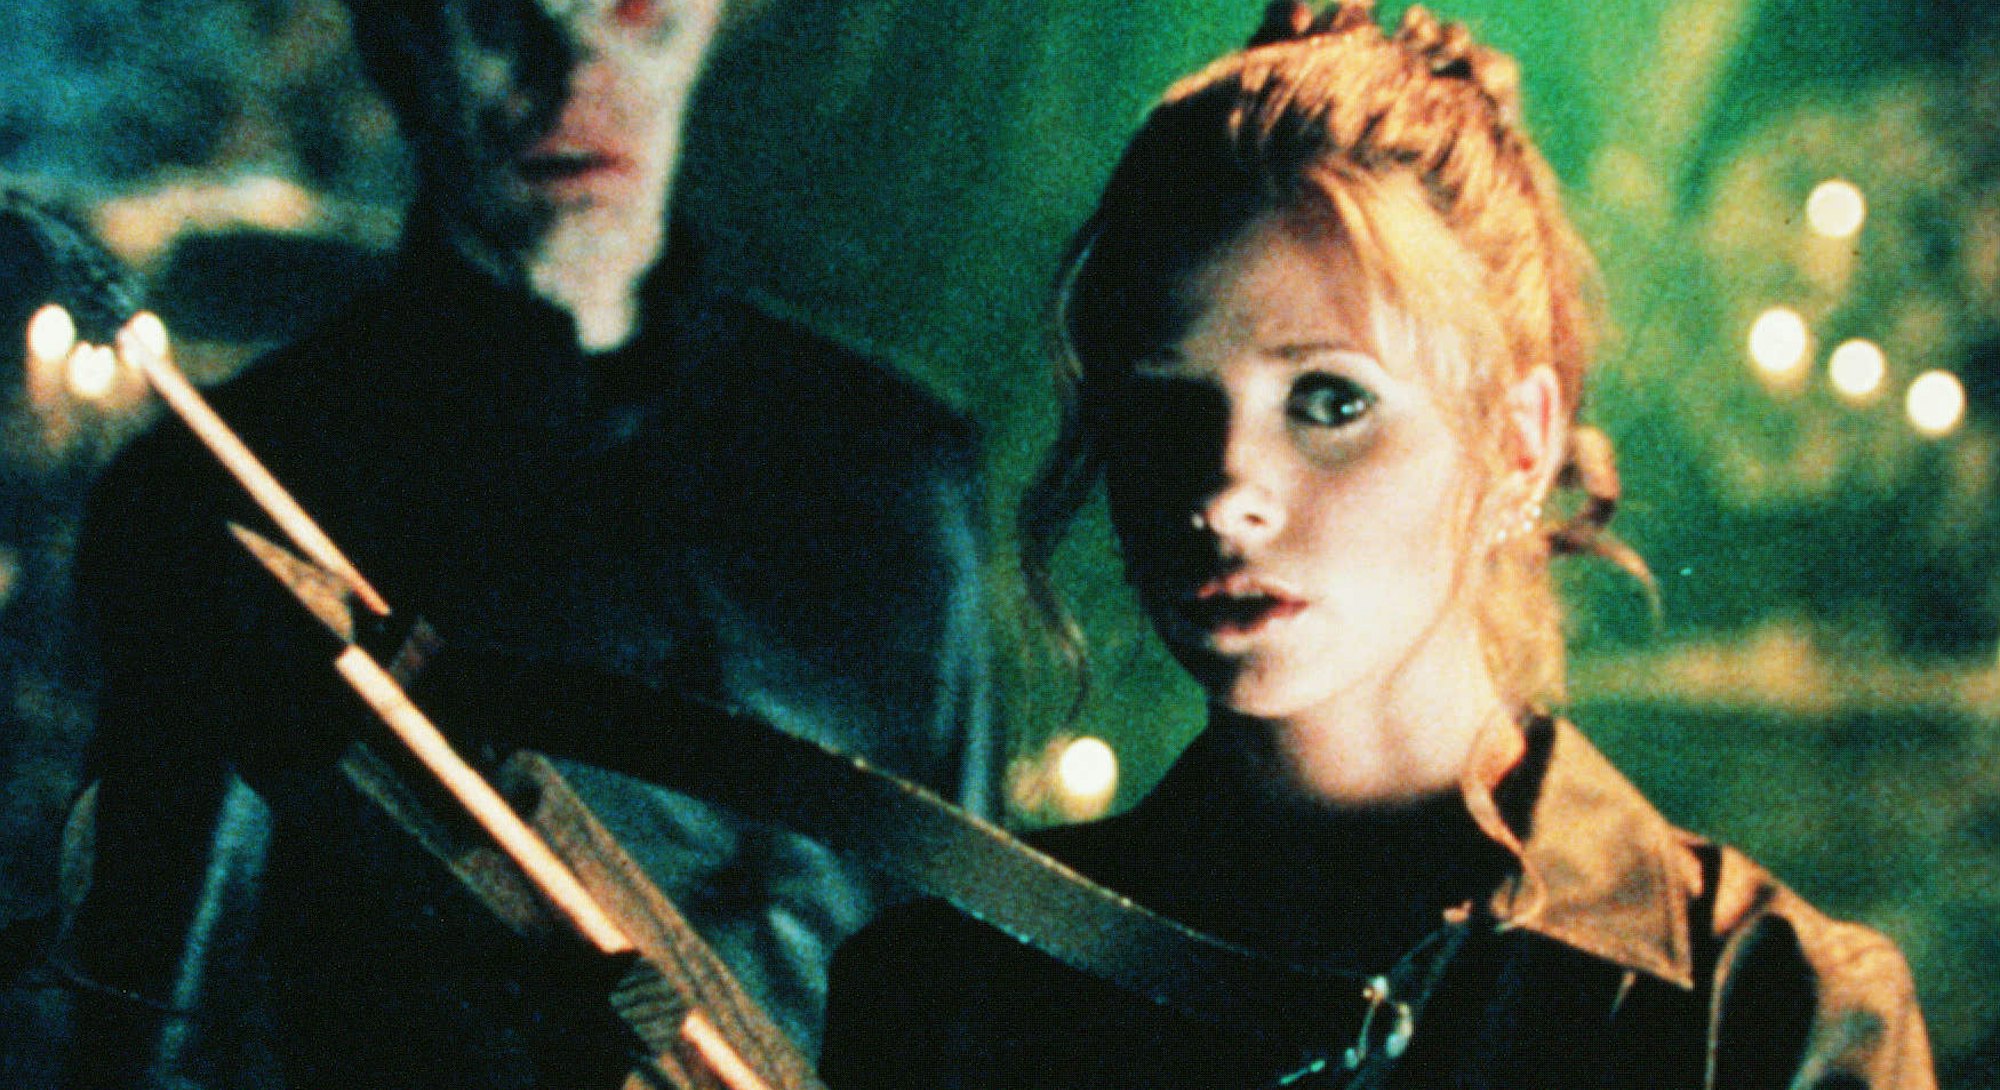 Sarah Michelle Gellar as Buffy The Vampire Slayer holding a crossbow in a scene and a vampire behind...